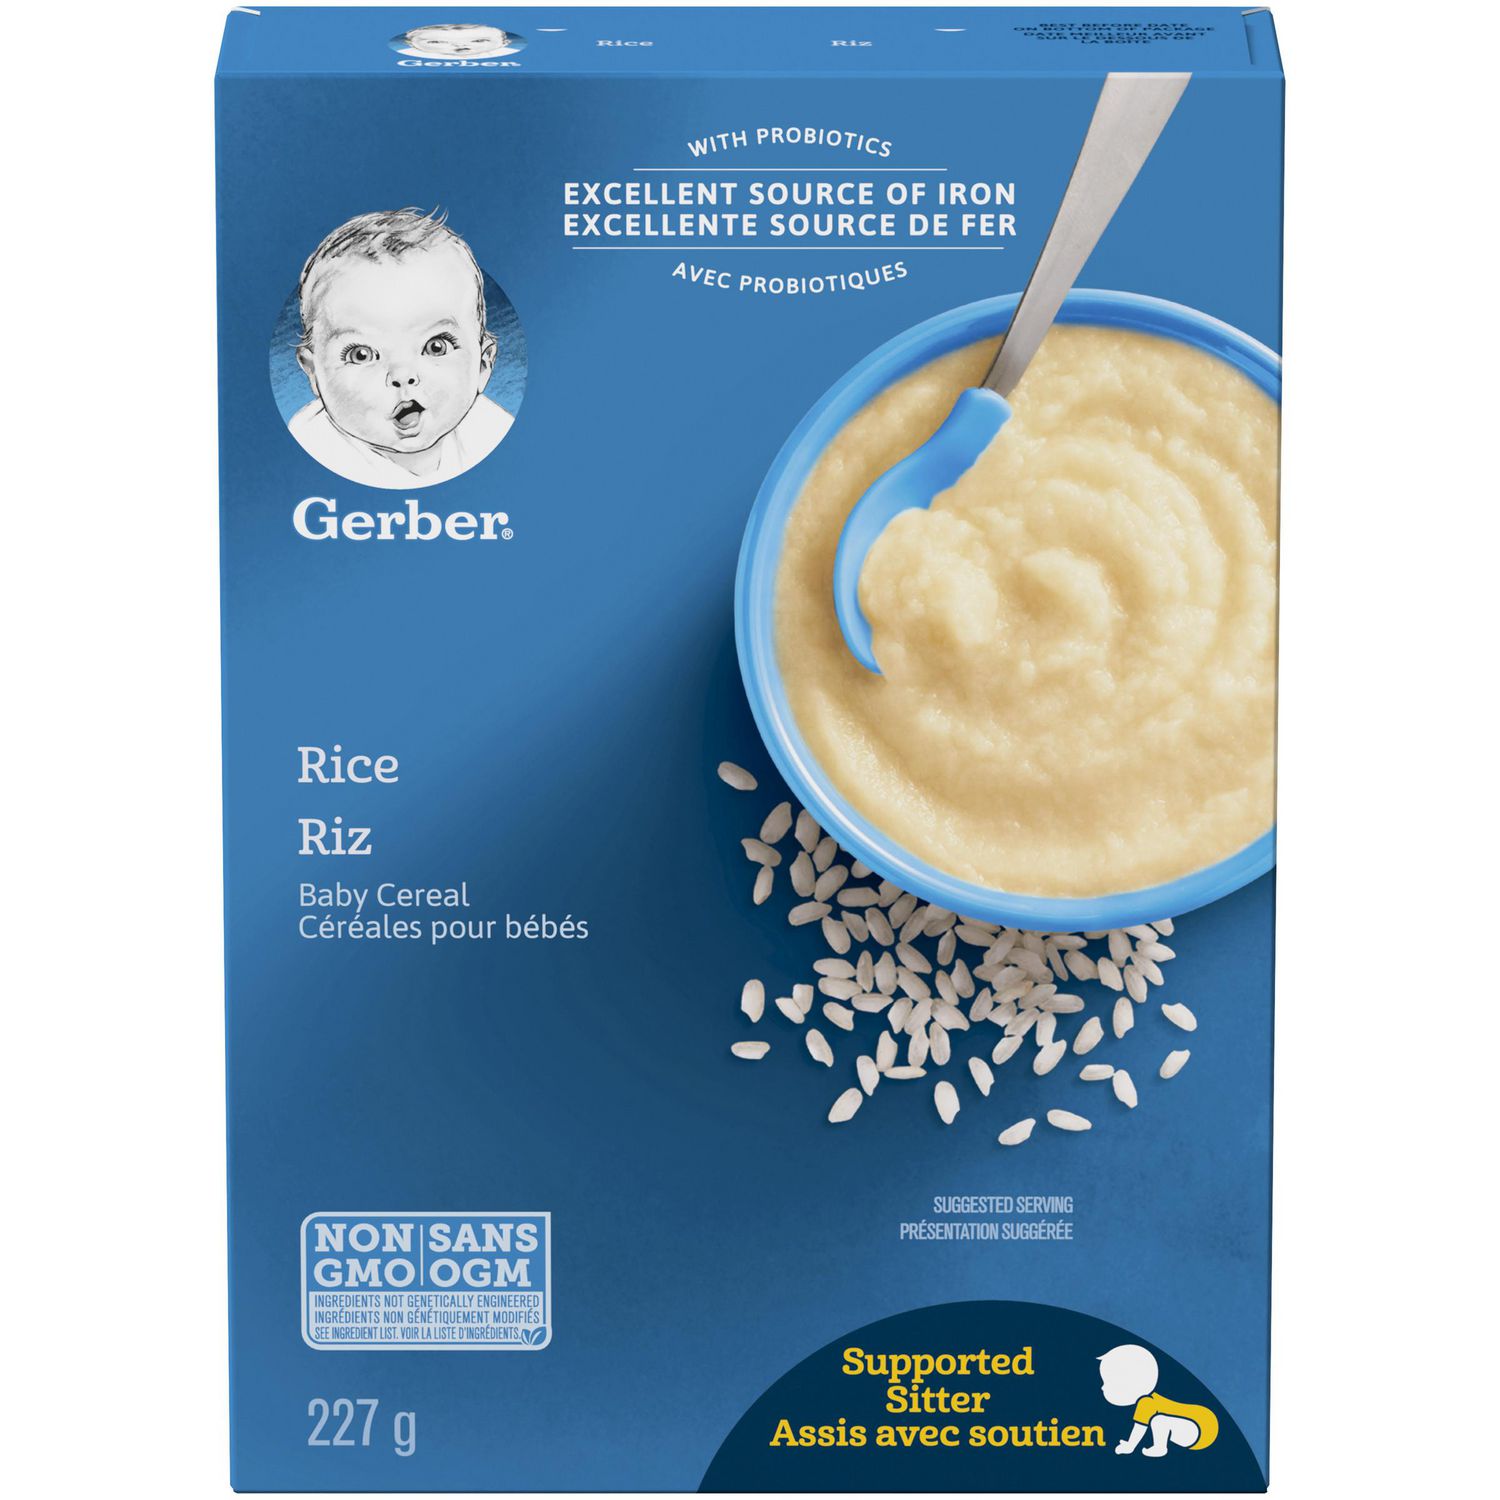 what age do babies start eating rice cereal